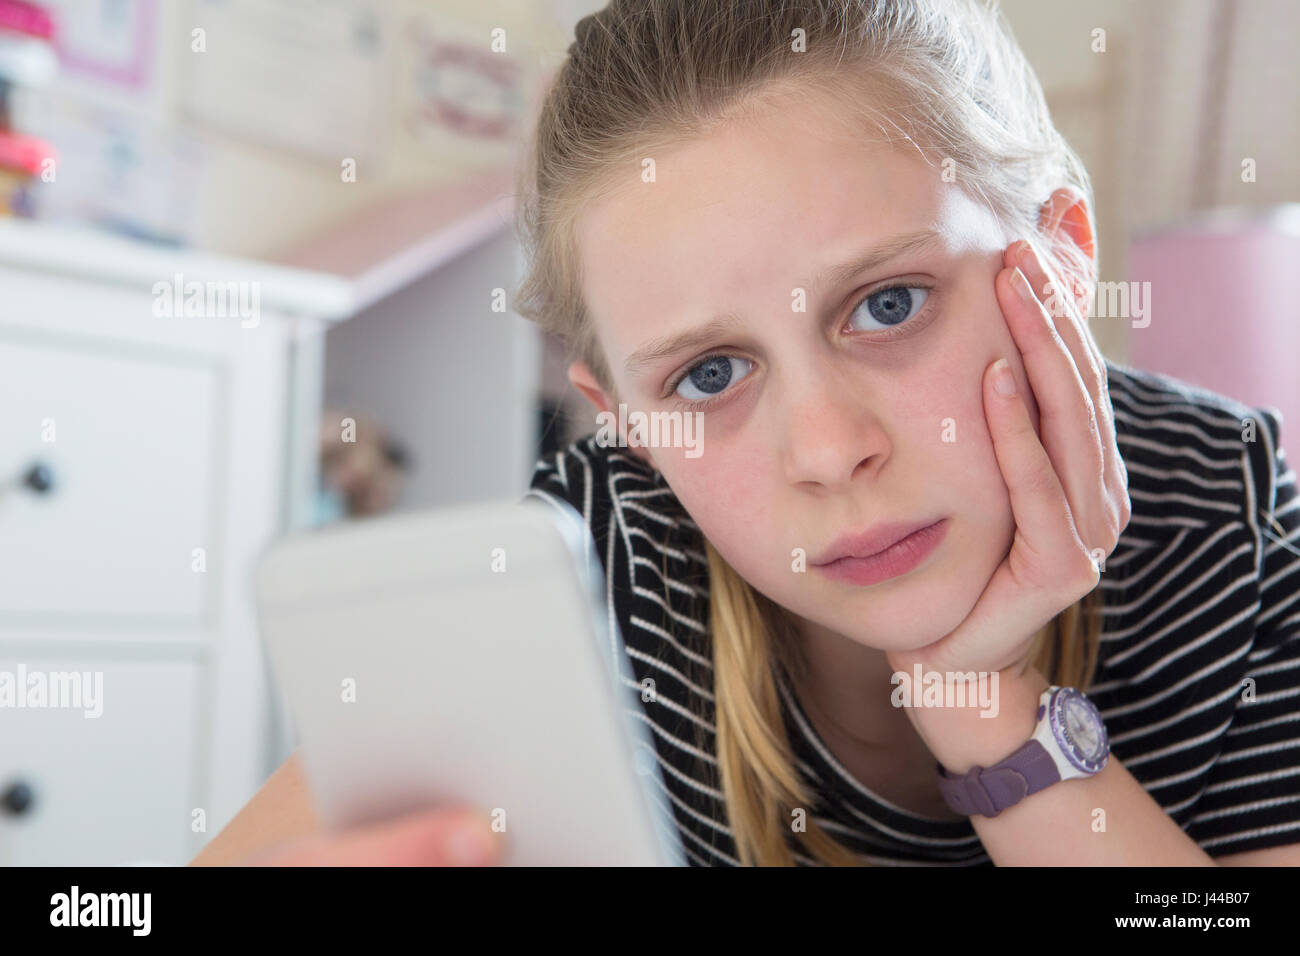 Young Girl Victim Of Bullying By Text Message Lying On Bed At Home Stock Photo